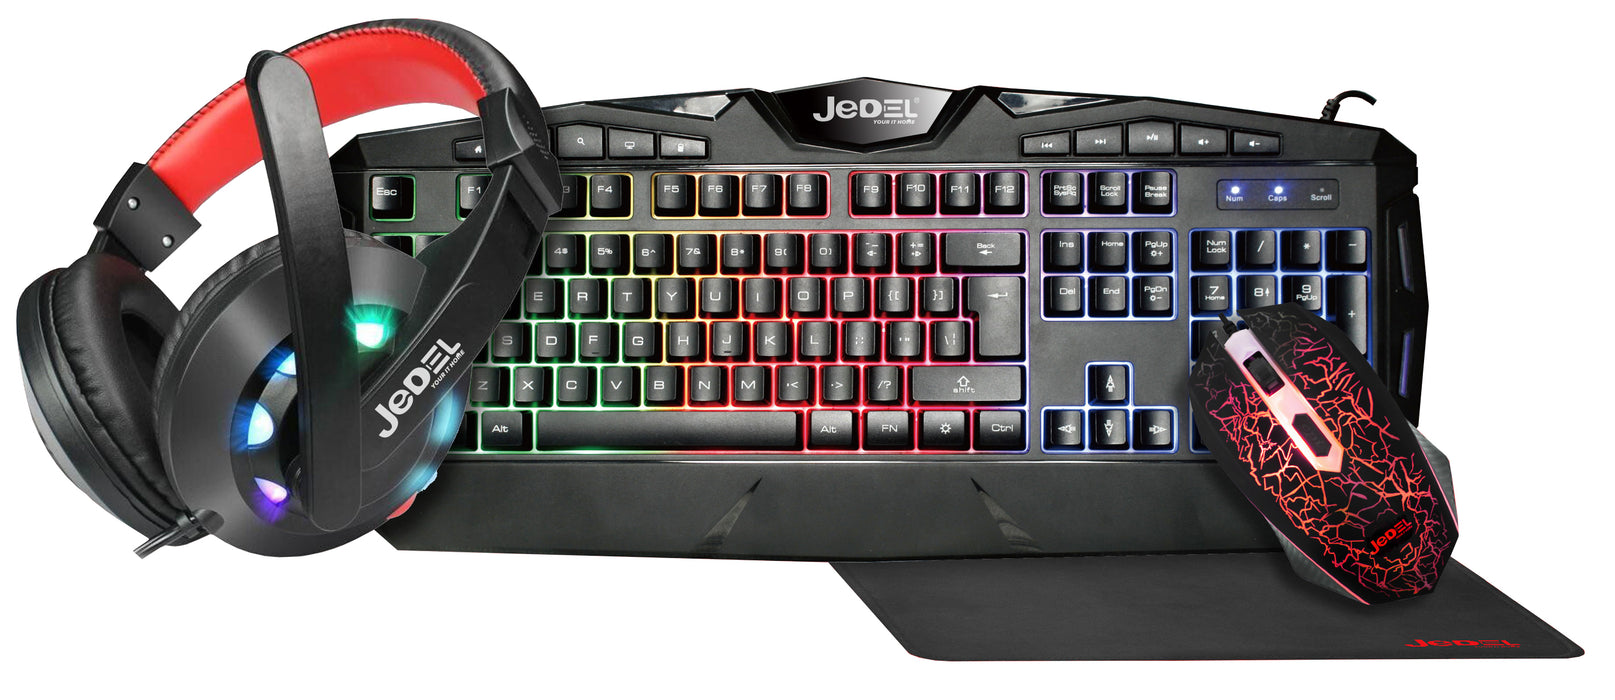 Jedel Knights Templar Elite 4 In 1 RGB Gaming Set - Keyboard And Mouse With Headset & XL Mouse Mat - KB-JED-CP04